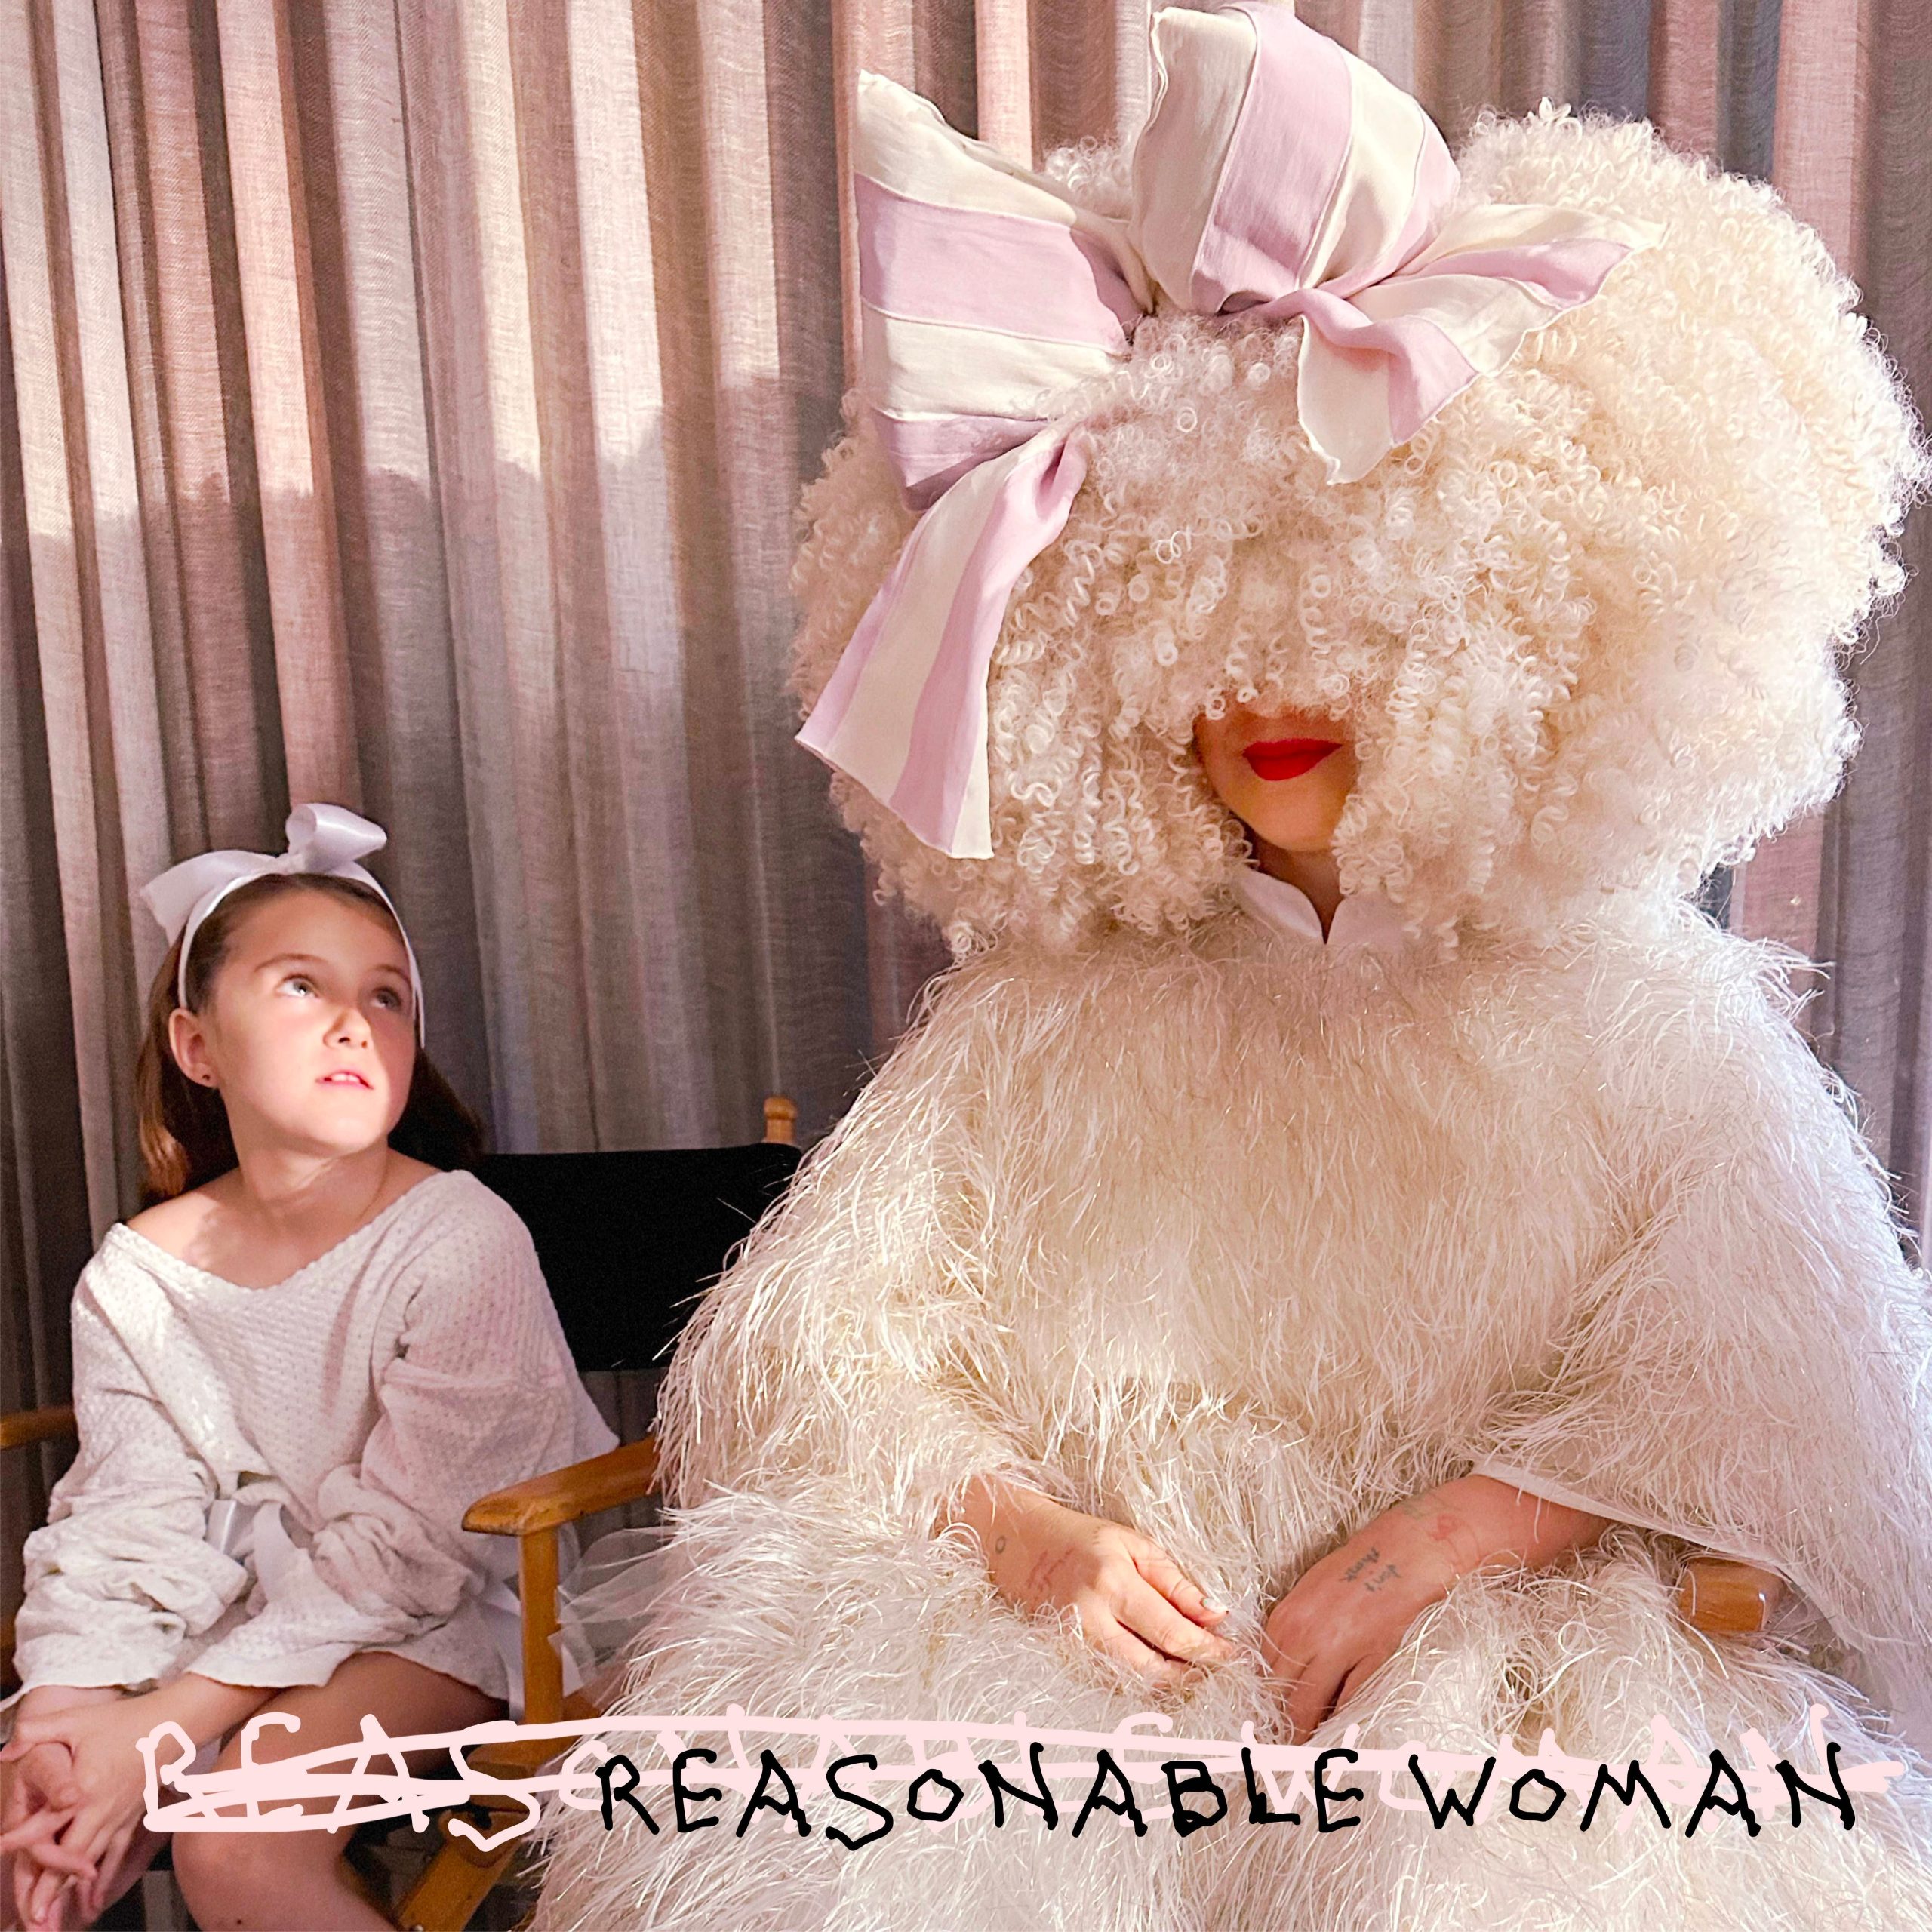 SIA ANNOUNCES NEW SINGLE ‘DANCE ALONE’ WITH KYLIE AND NEW ALBUM ‘REASONABLE WOMAN’ OUT ON MAY 3RD